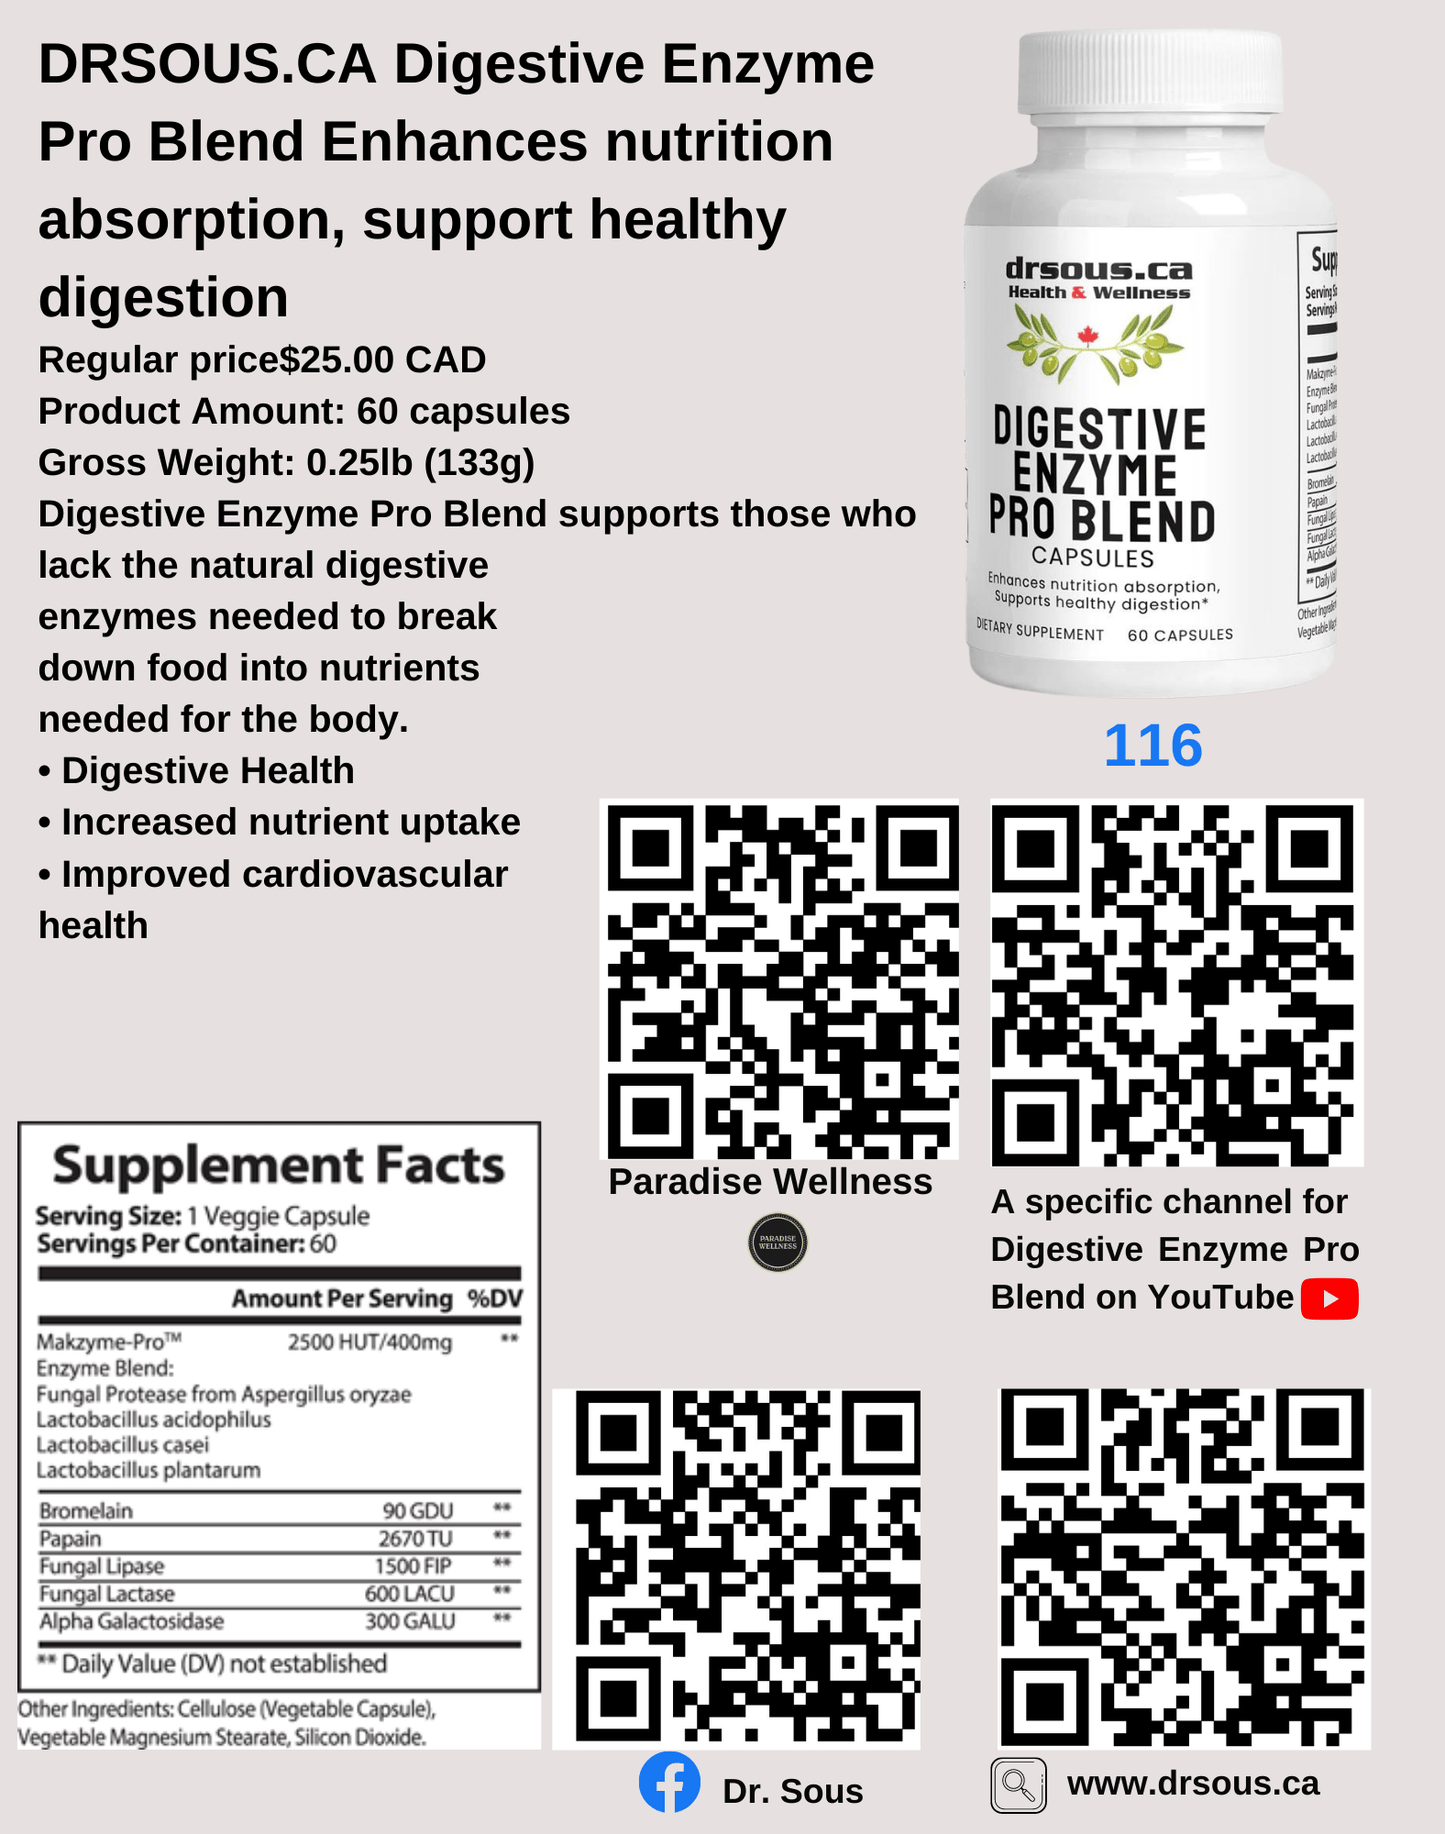 2985. Digestion Issues 10) Improve Digestion - DrSous.Ca